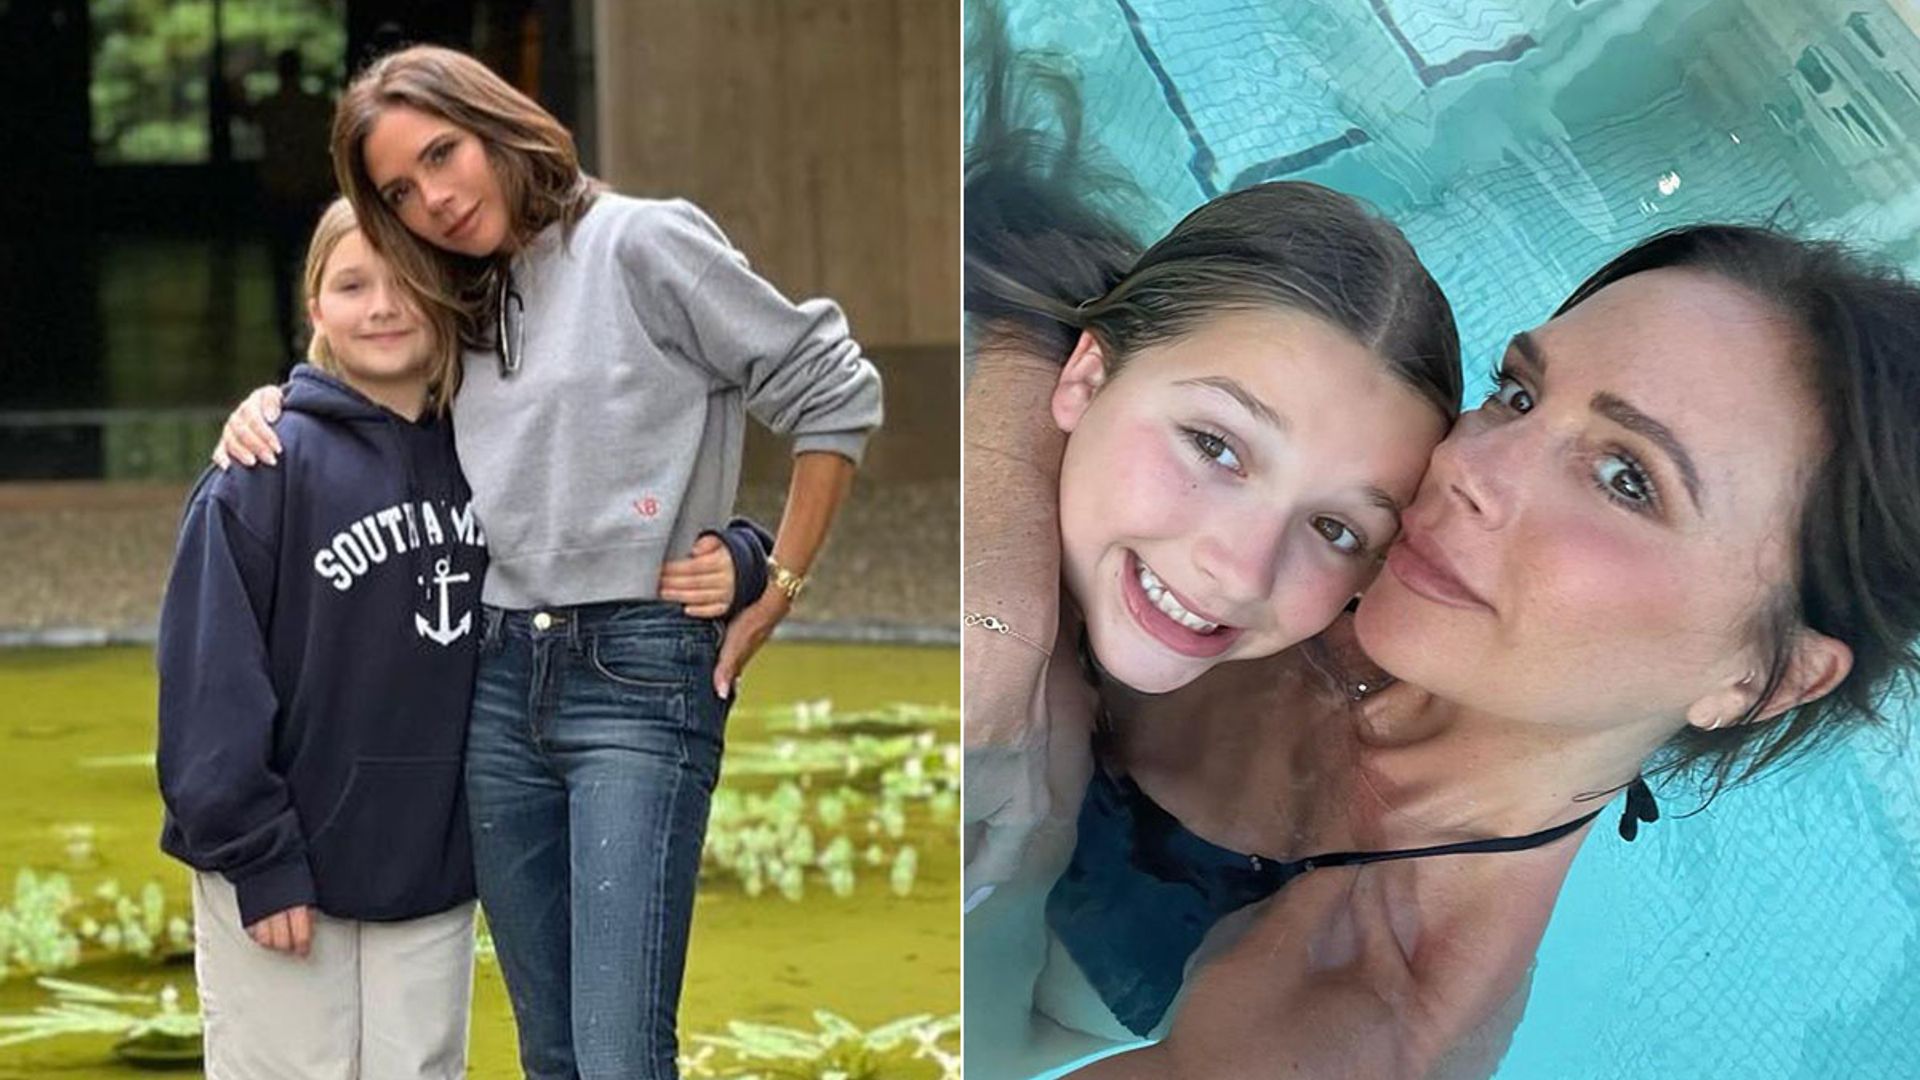 Victoria Beckham is every inch the proud mum as she celebrates daughter Harper's latest achievement